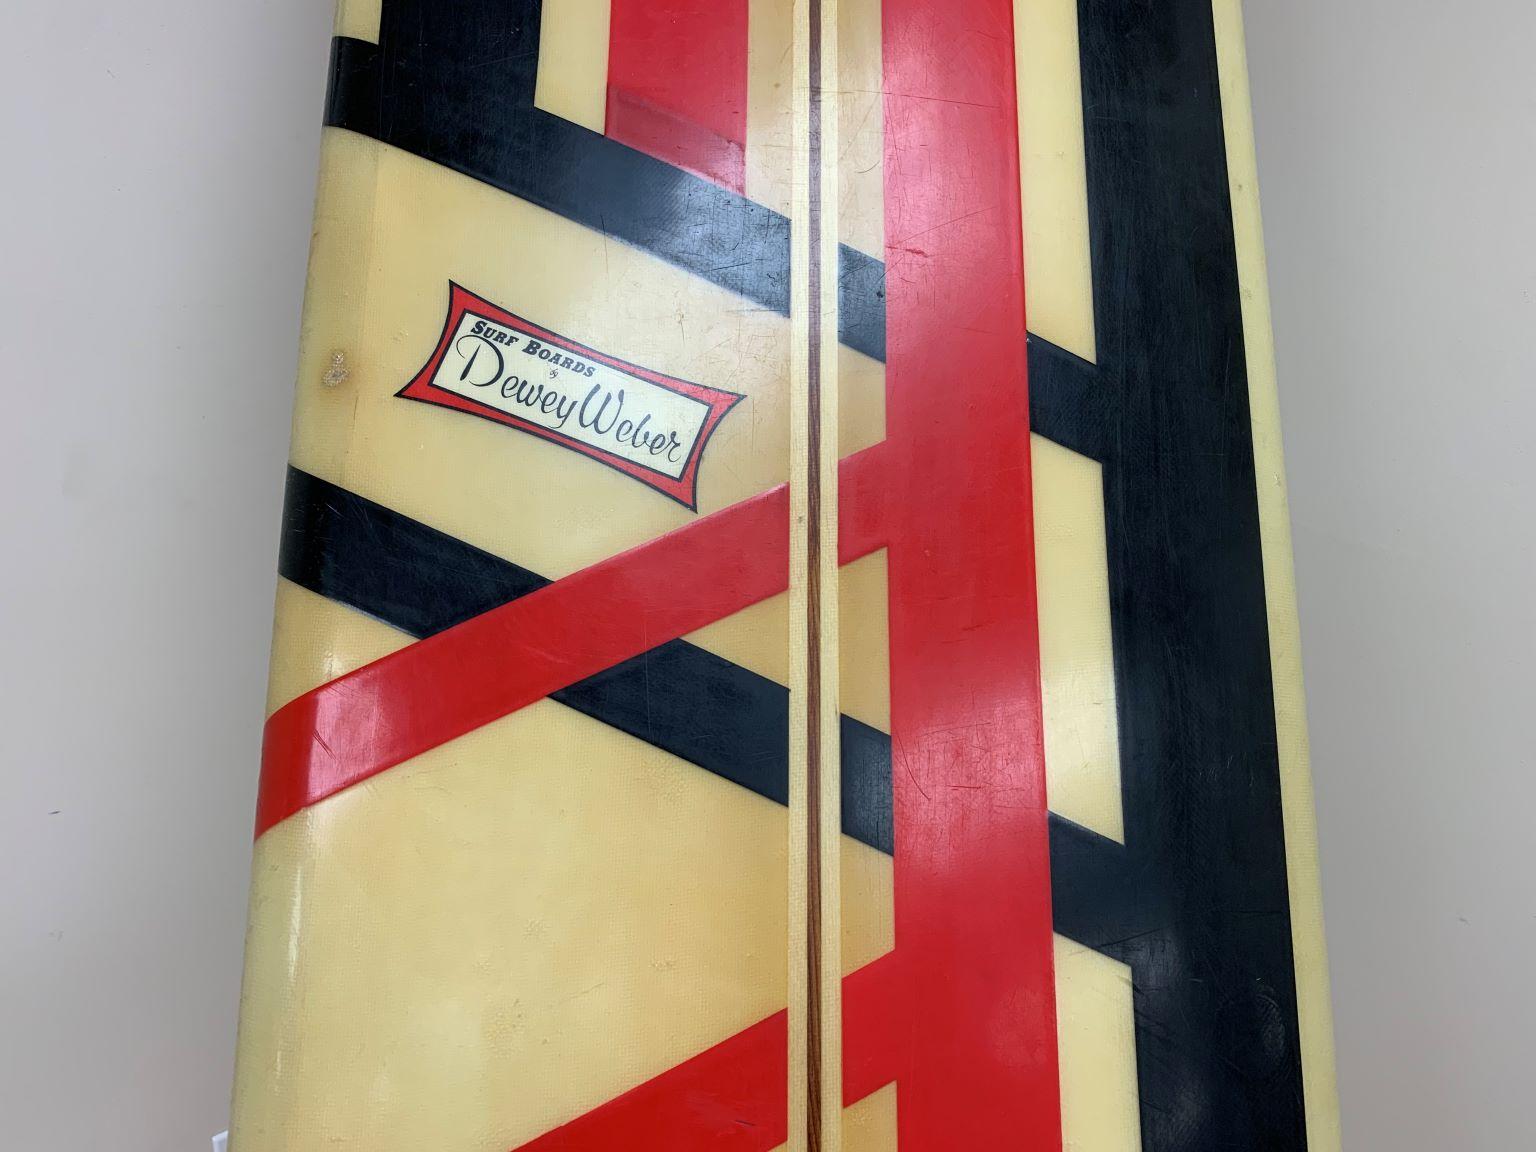 Vintage Dewey Weber surfboard with an amazing black and red stripe pattern. Dewey Weber Brand tag is still intact. The board does have a fiberglass repair on the bottom side (see photo) as a previous owner installed a bracket so it could be hung on